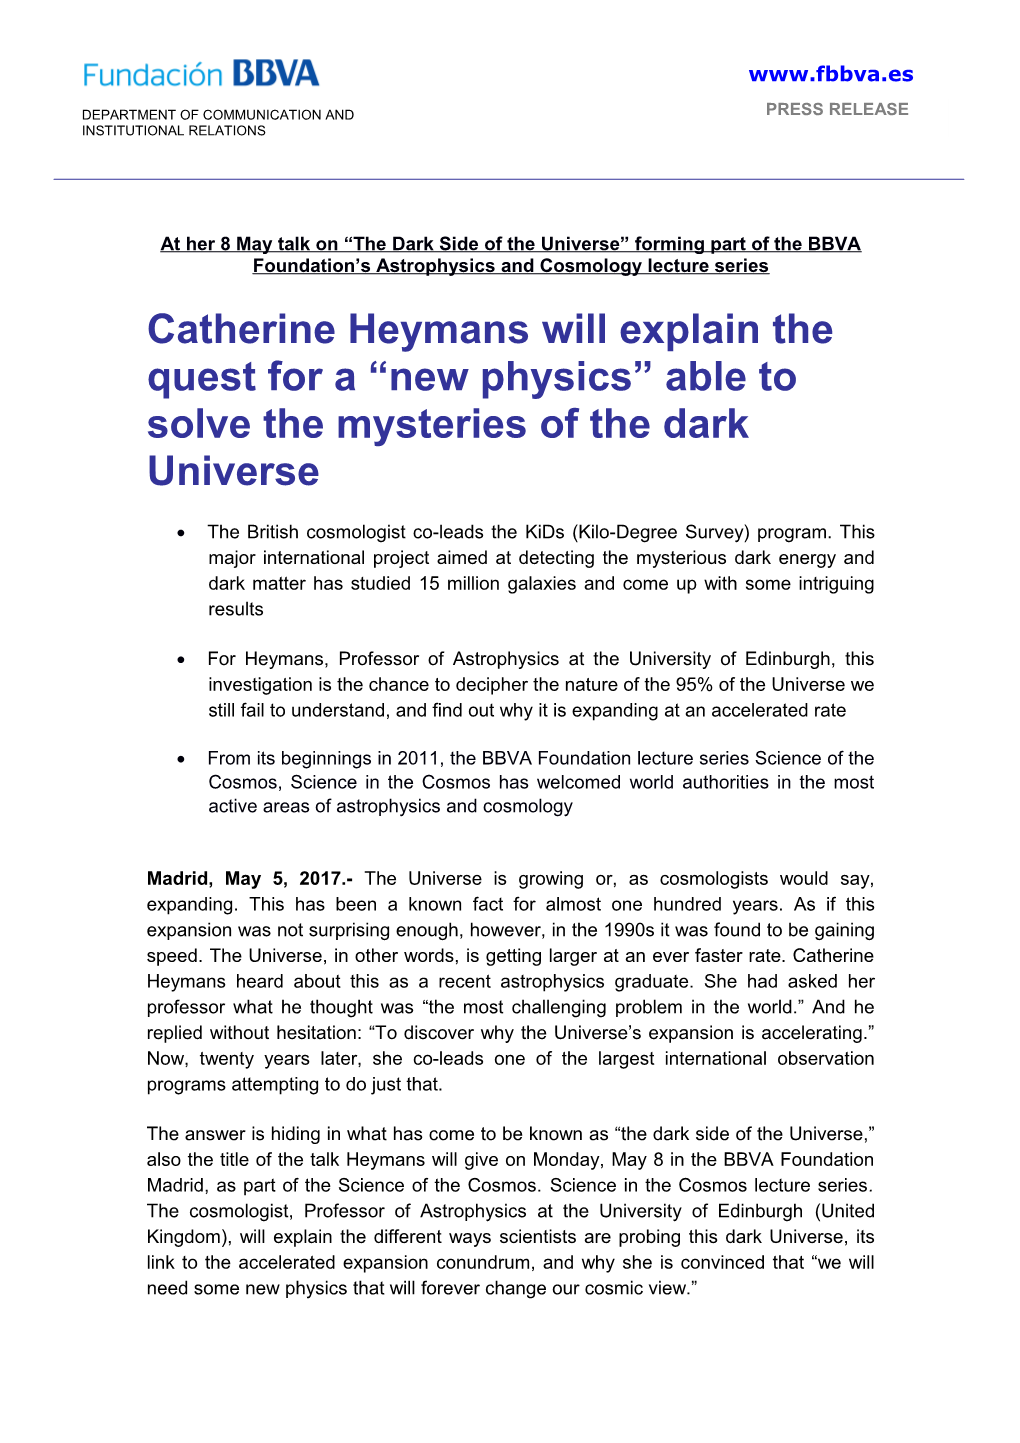 Catherine Heymans Will Explain the Quest for a New Physics Able to Solve the Mysteries